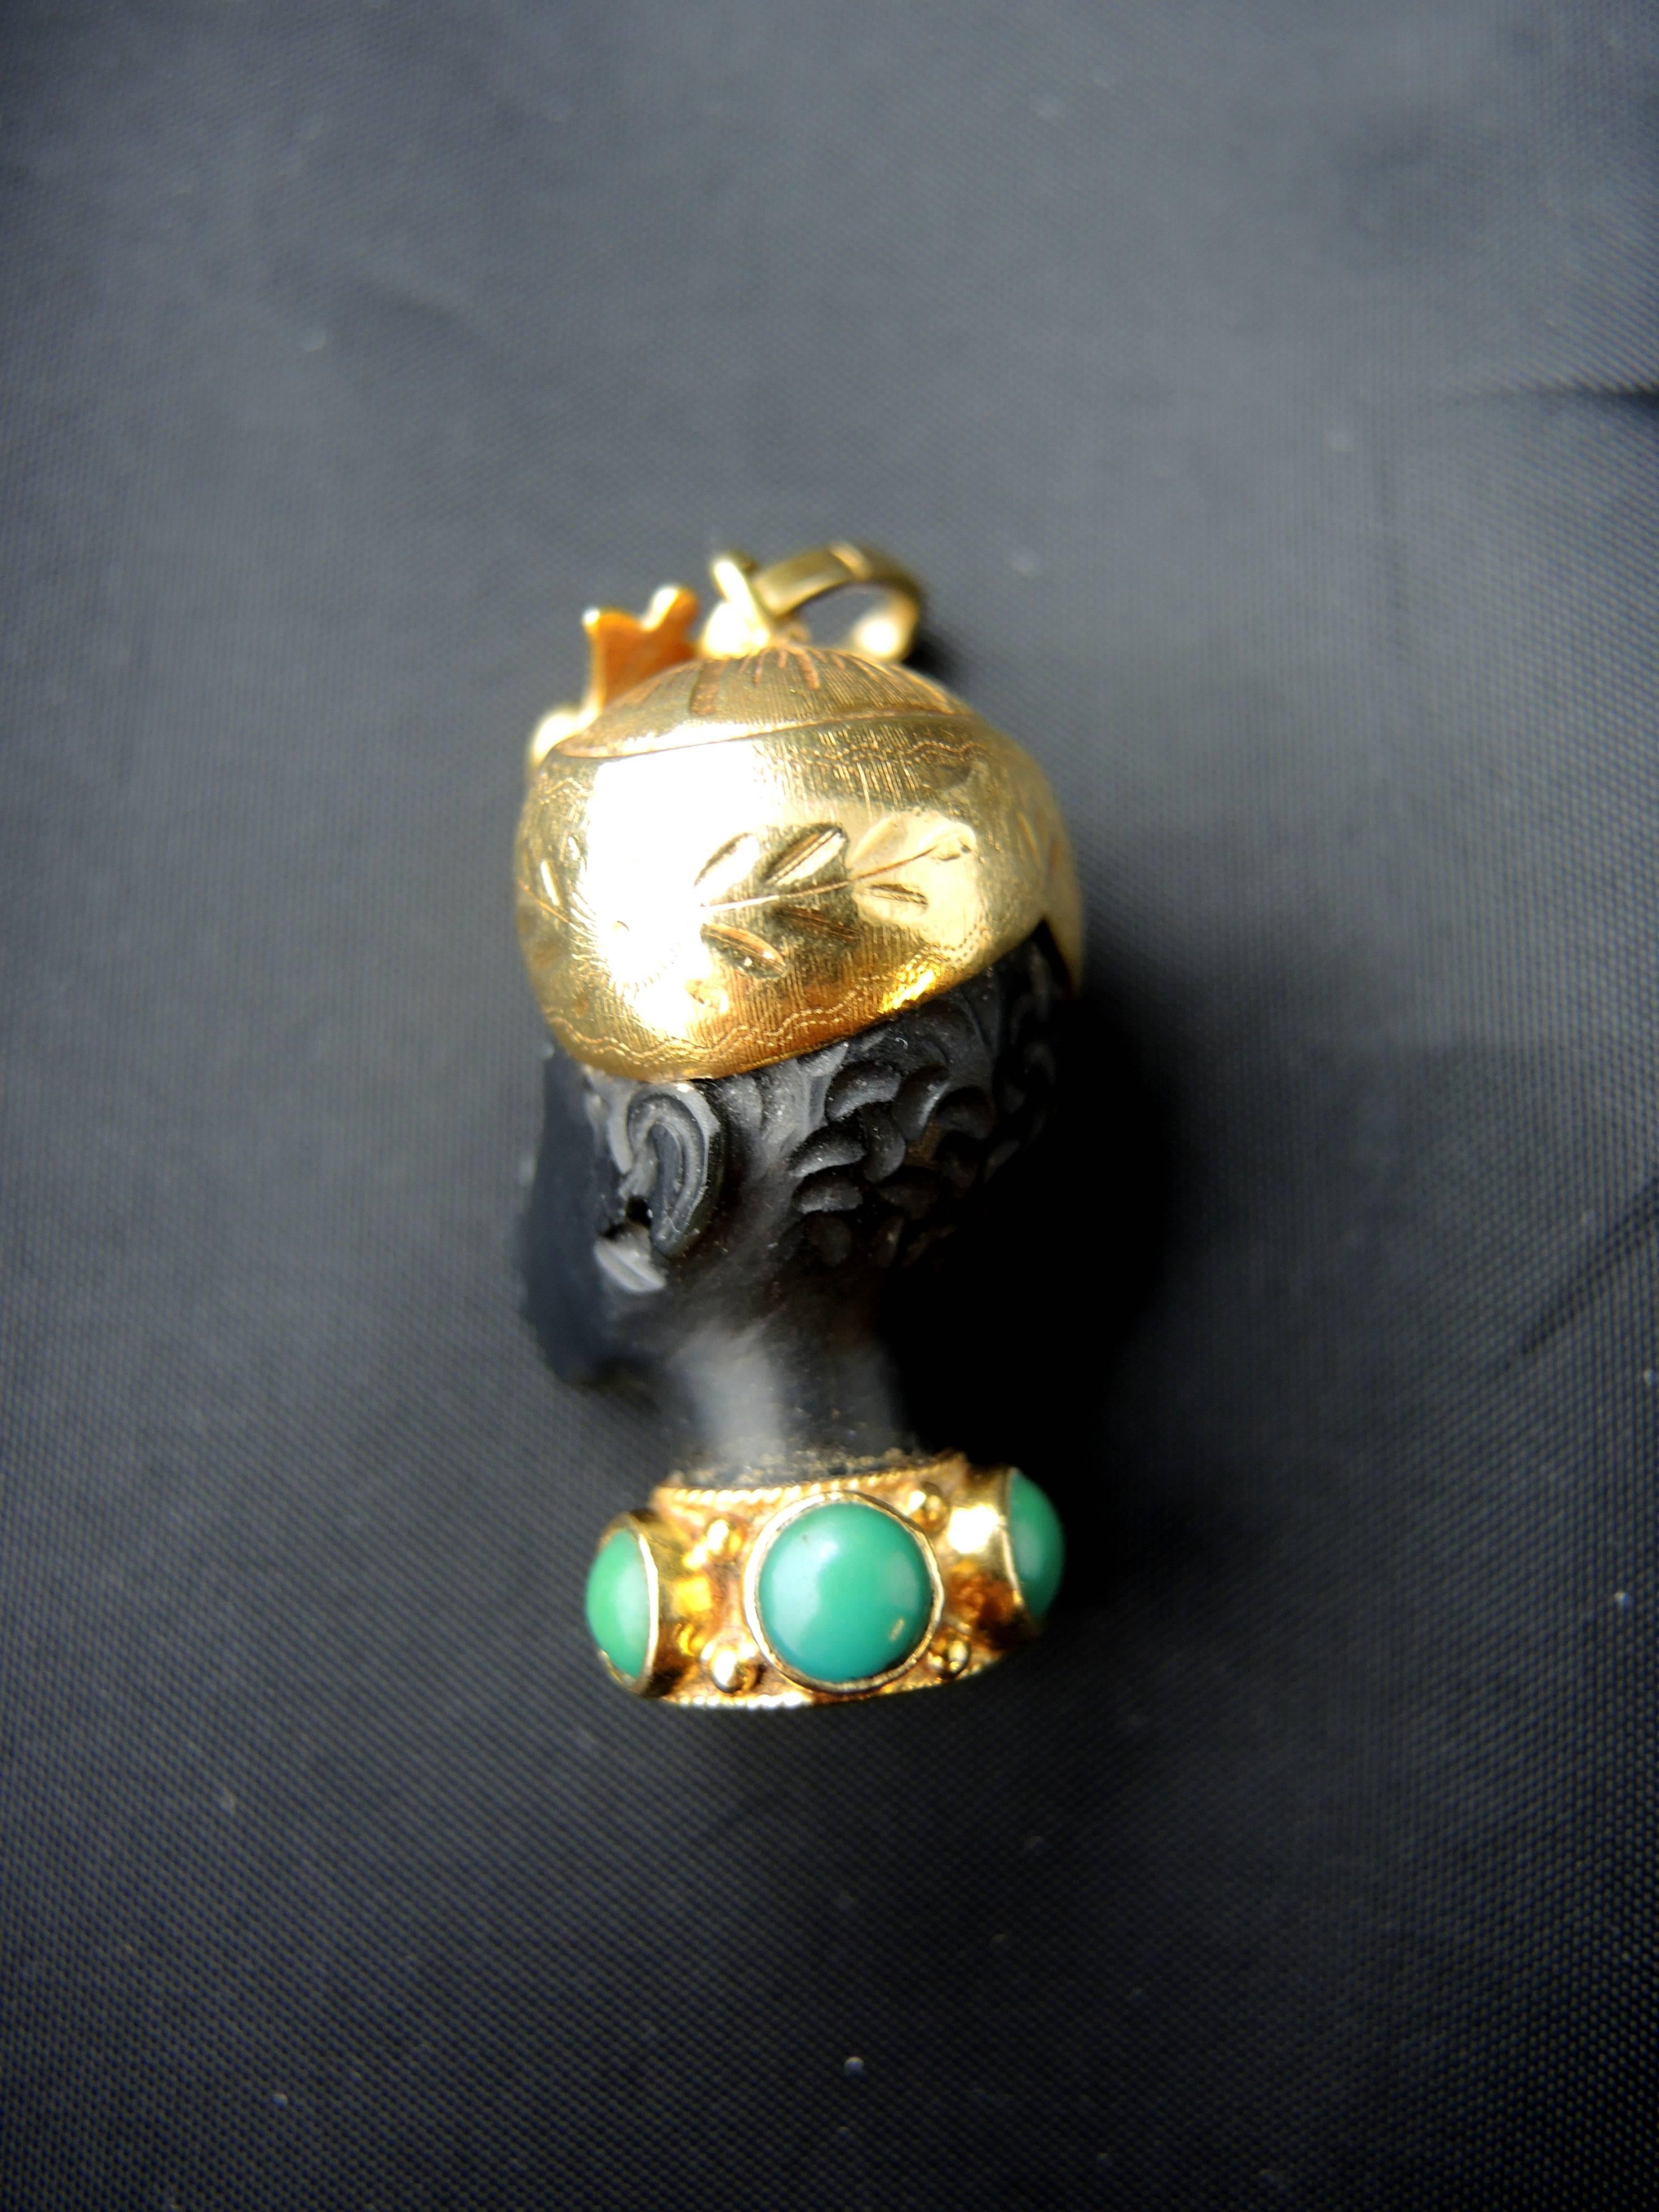 Vintage pendant showing the head of a Moors made of ebony, with a turban and a collar made of 18 Kt gold (hallmark: owl) set with turquoises' cabochon.

Circa 1960, with the Nardi spirit of design.

Weight: 16,60 g
Height: 4,50 cm

State : very